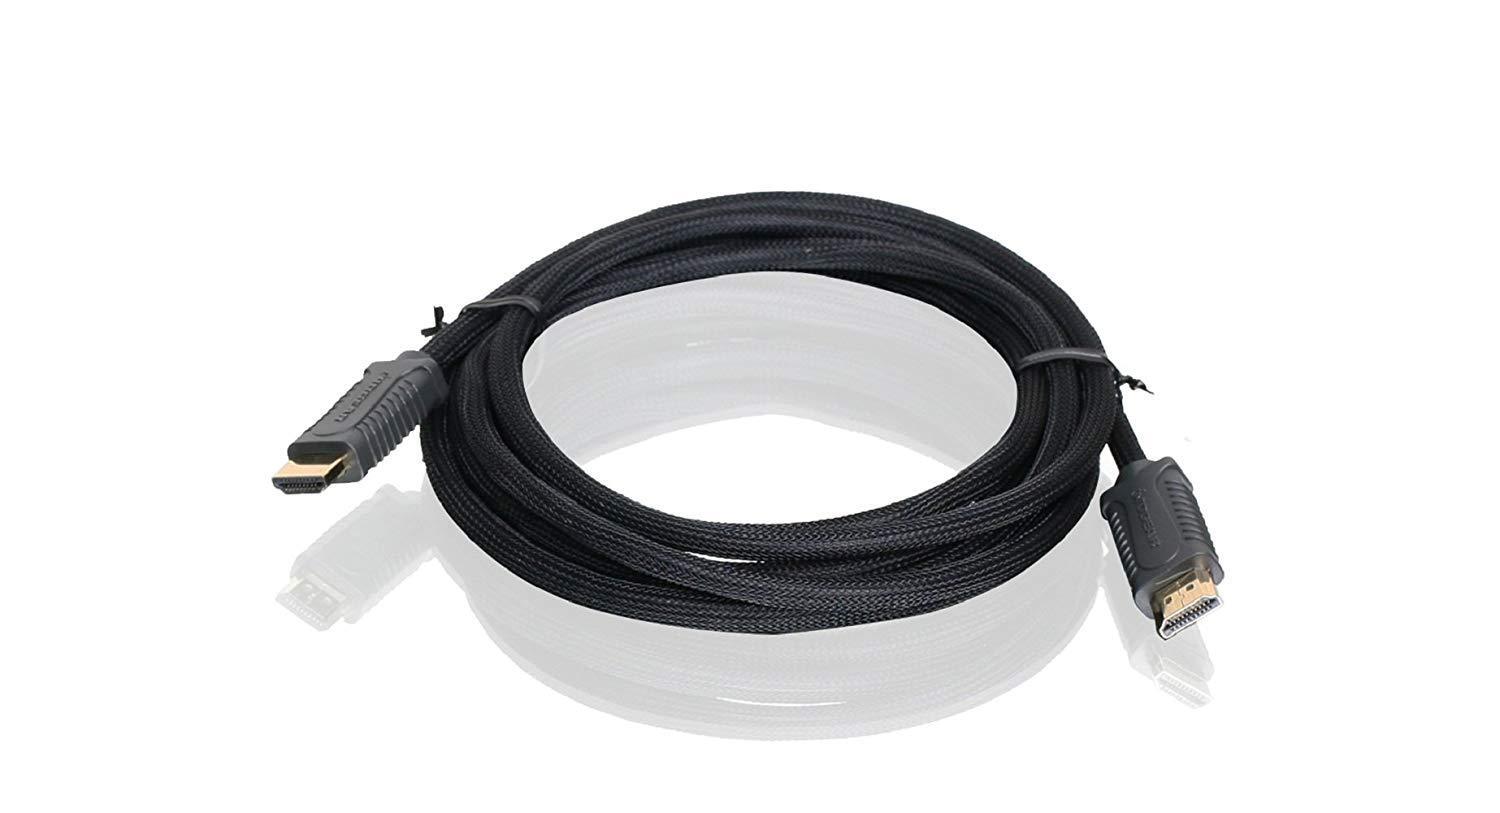 6 5ft 2m high speed hdmi cable